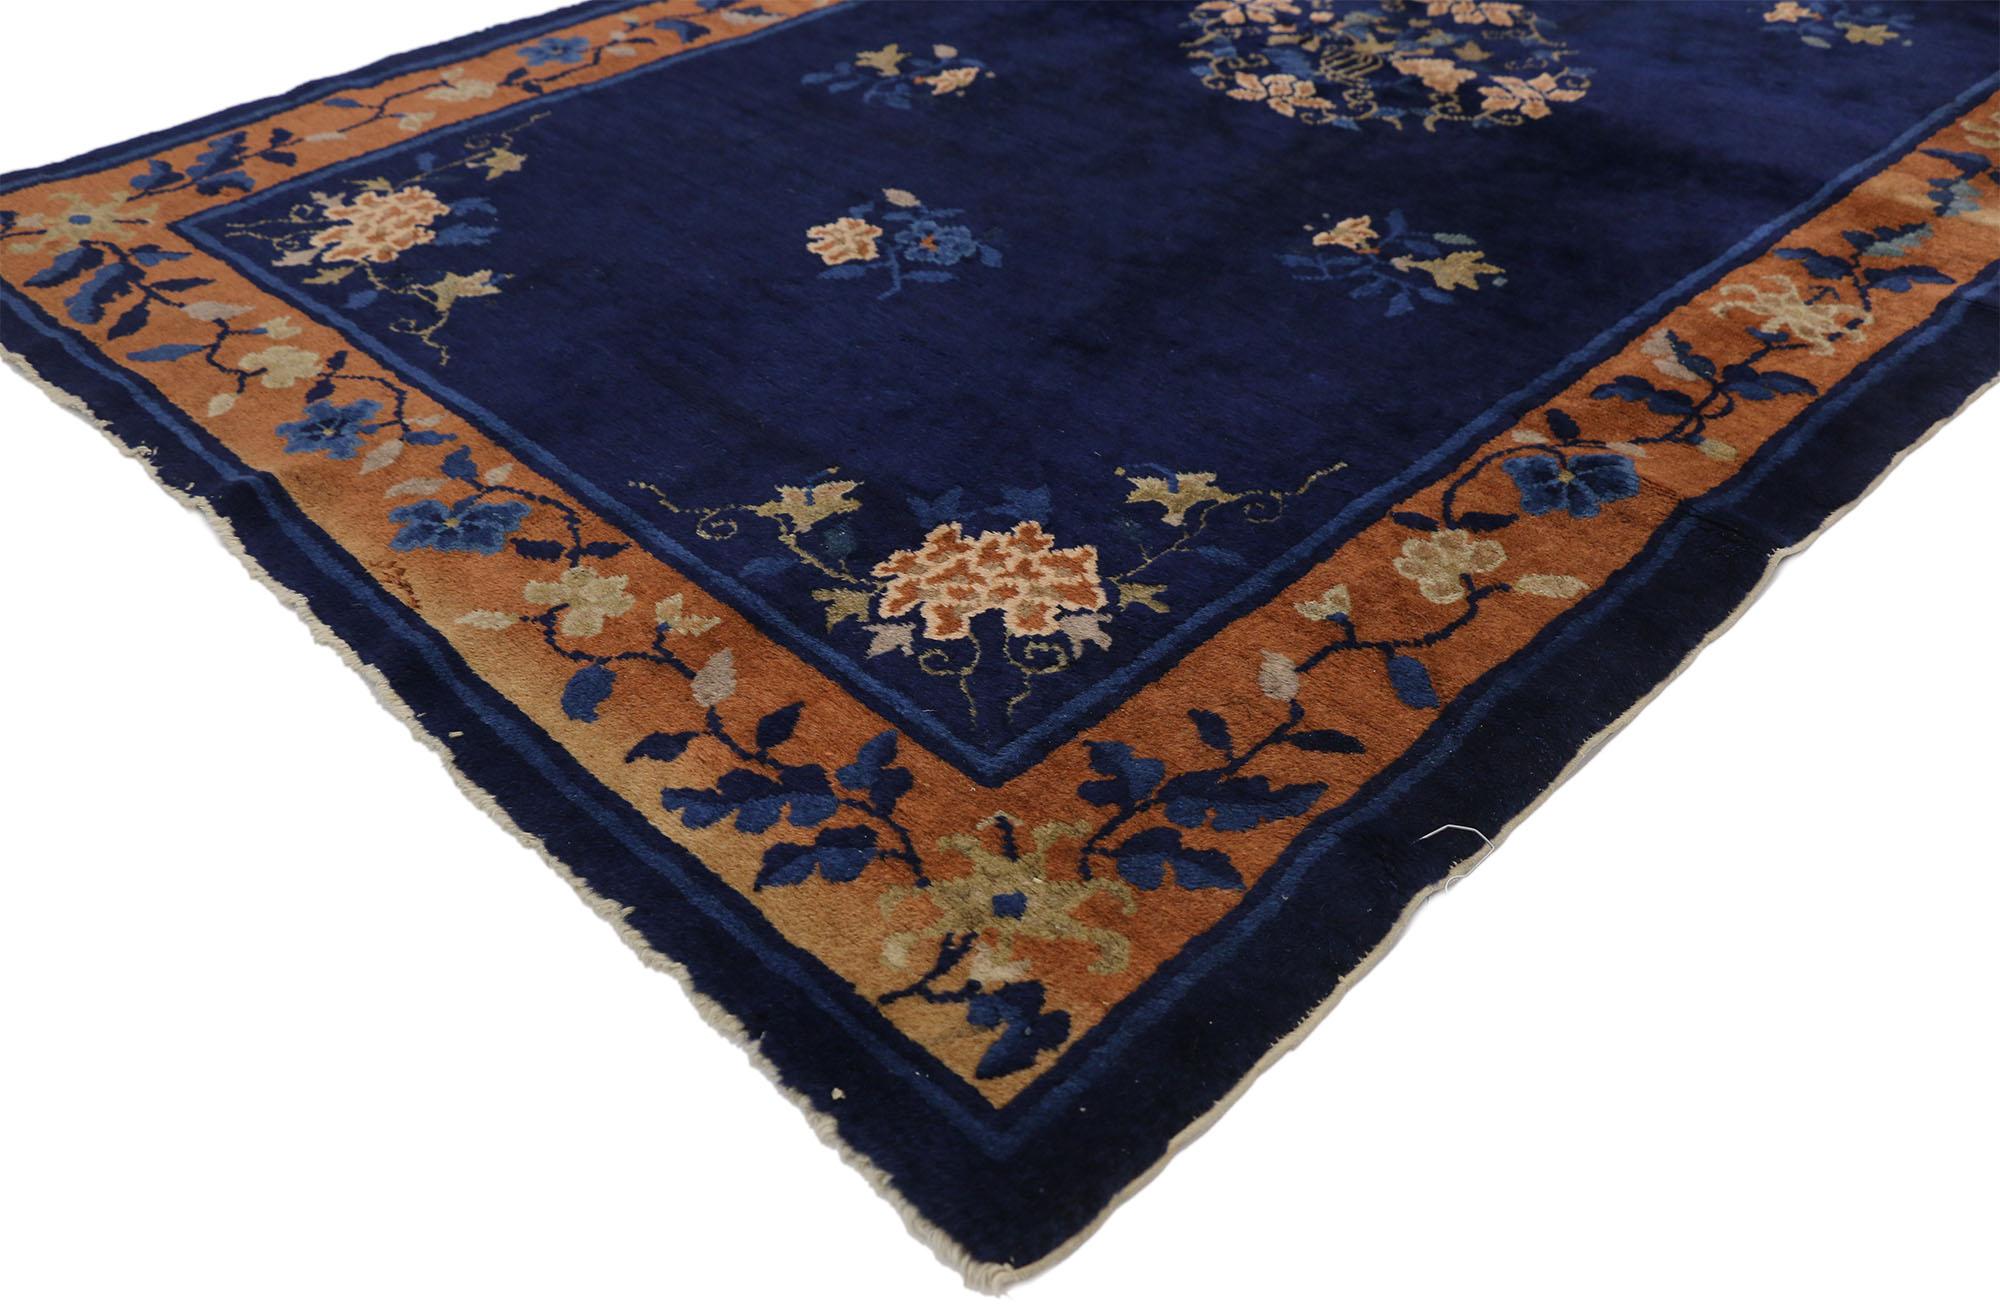 74478, antique Chinese Peking Accent rug with Chinese Art Deco style. This antique Peking rug showcases a beautiful Chinese Art Deco style. It has a circular shaped central medallion made up of floral vines and sparse sprays of flowers frame the